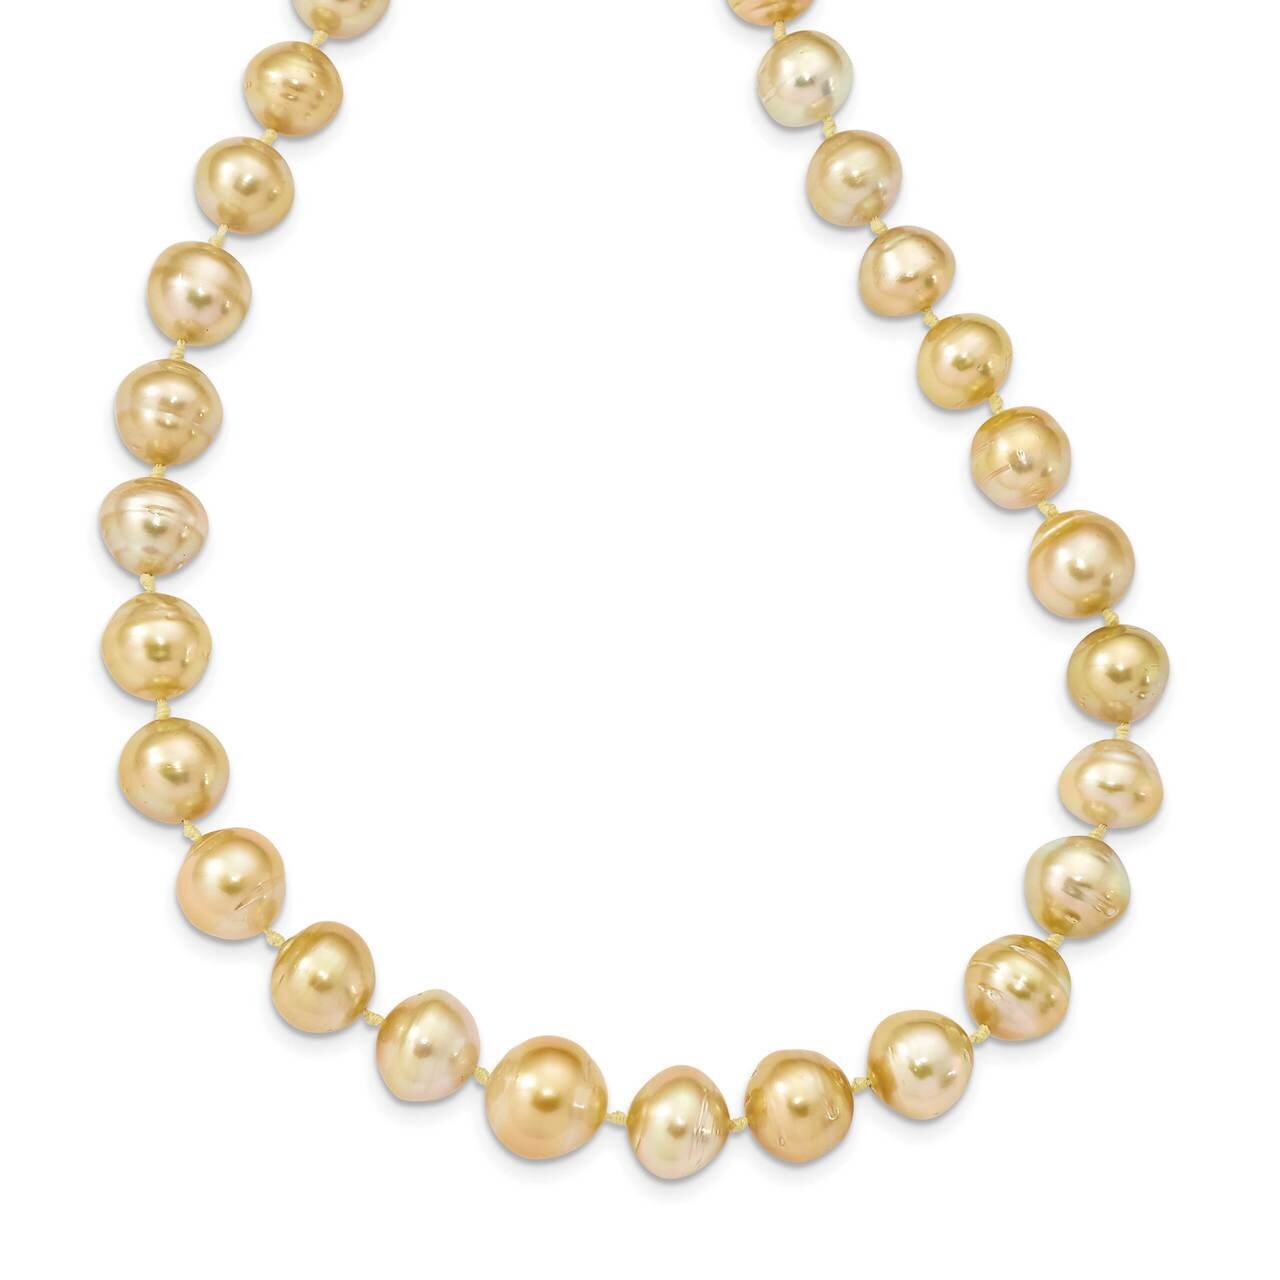 9-12mm Golden Saltwater Cult South Sea Graduated Baroque Pearl Necklace 14k Gold XF746-19